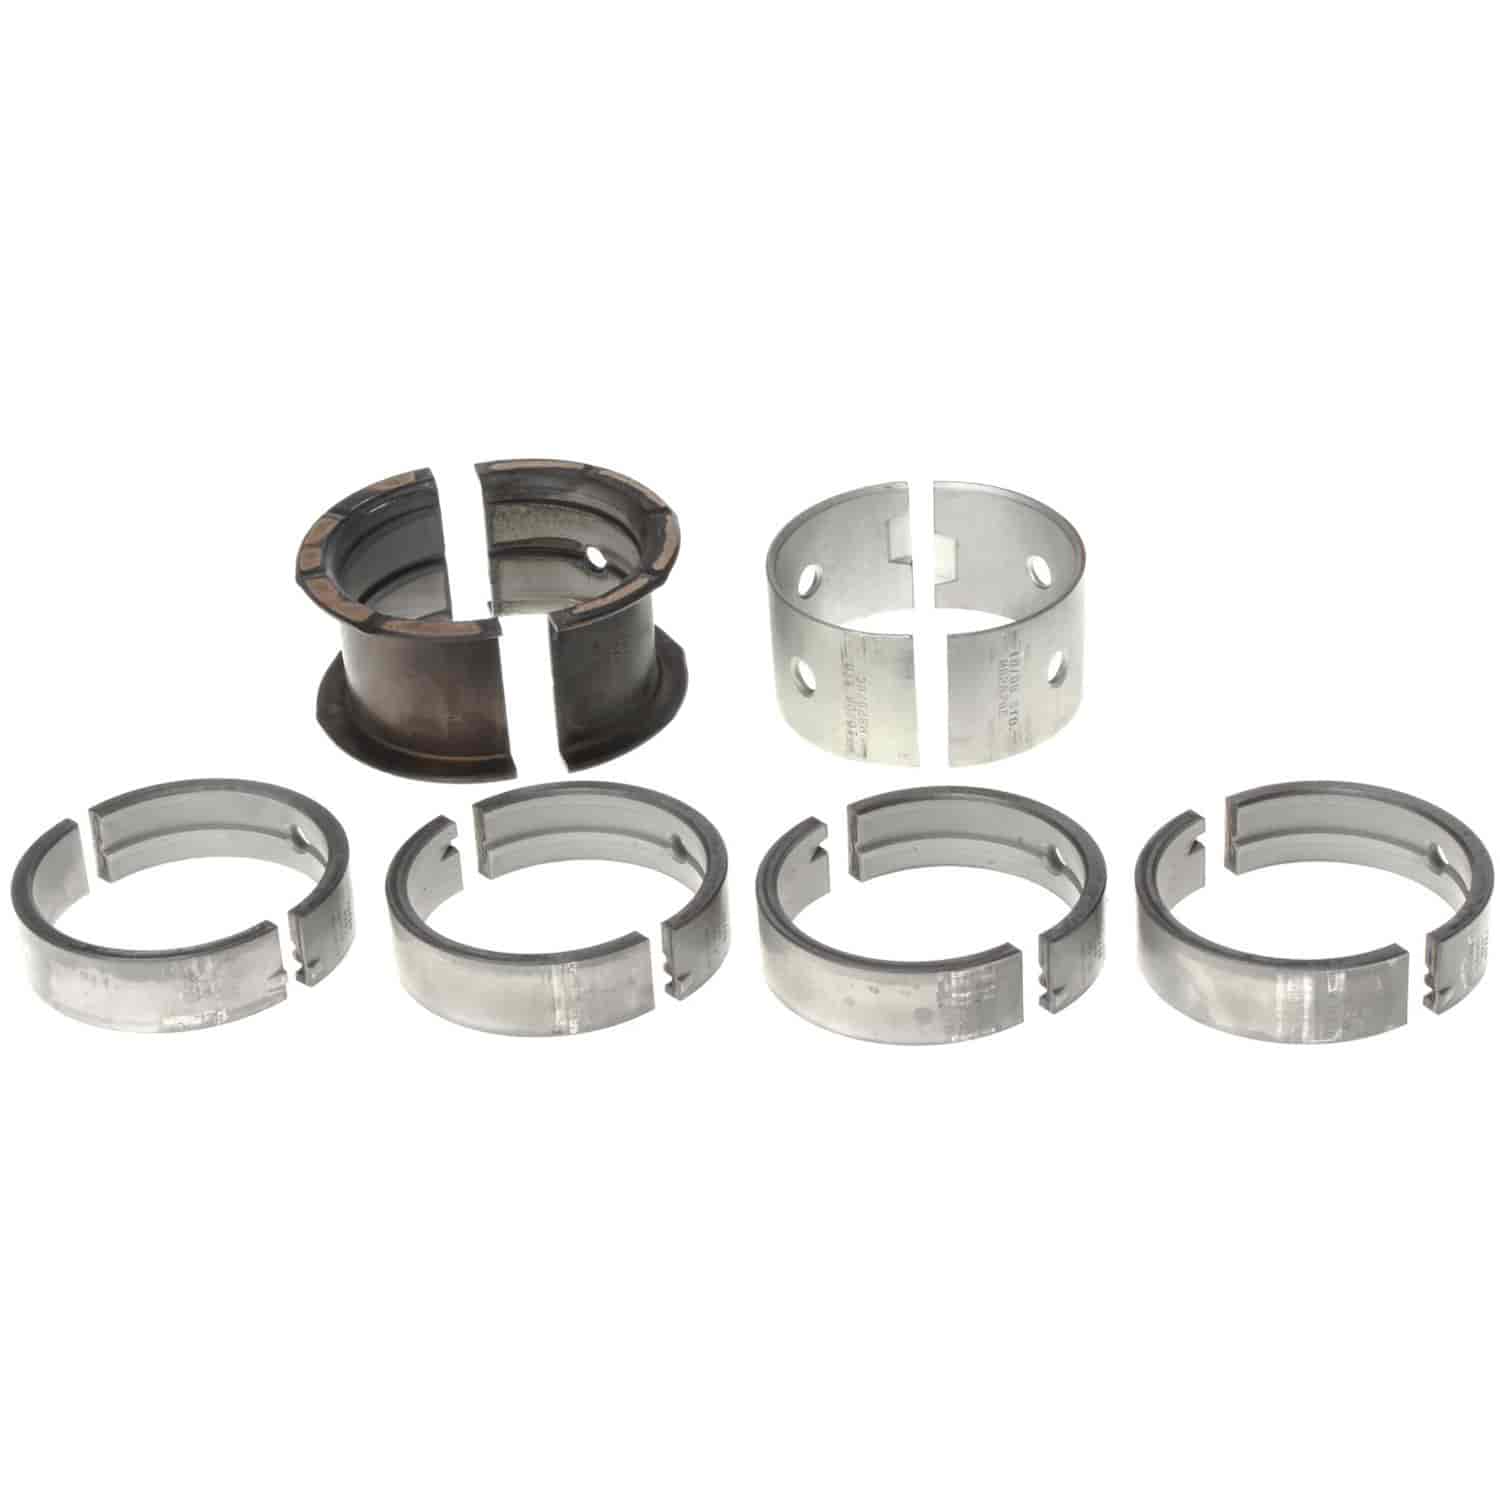 Main Bearing Set Chevy 1970-1980 V8 400 with Standard Size